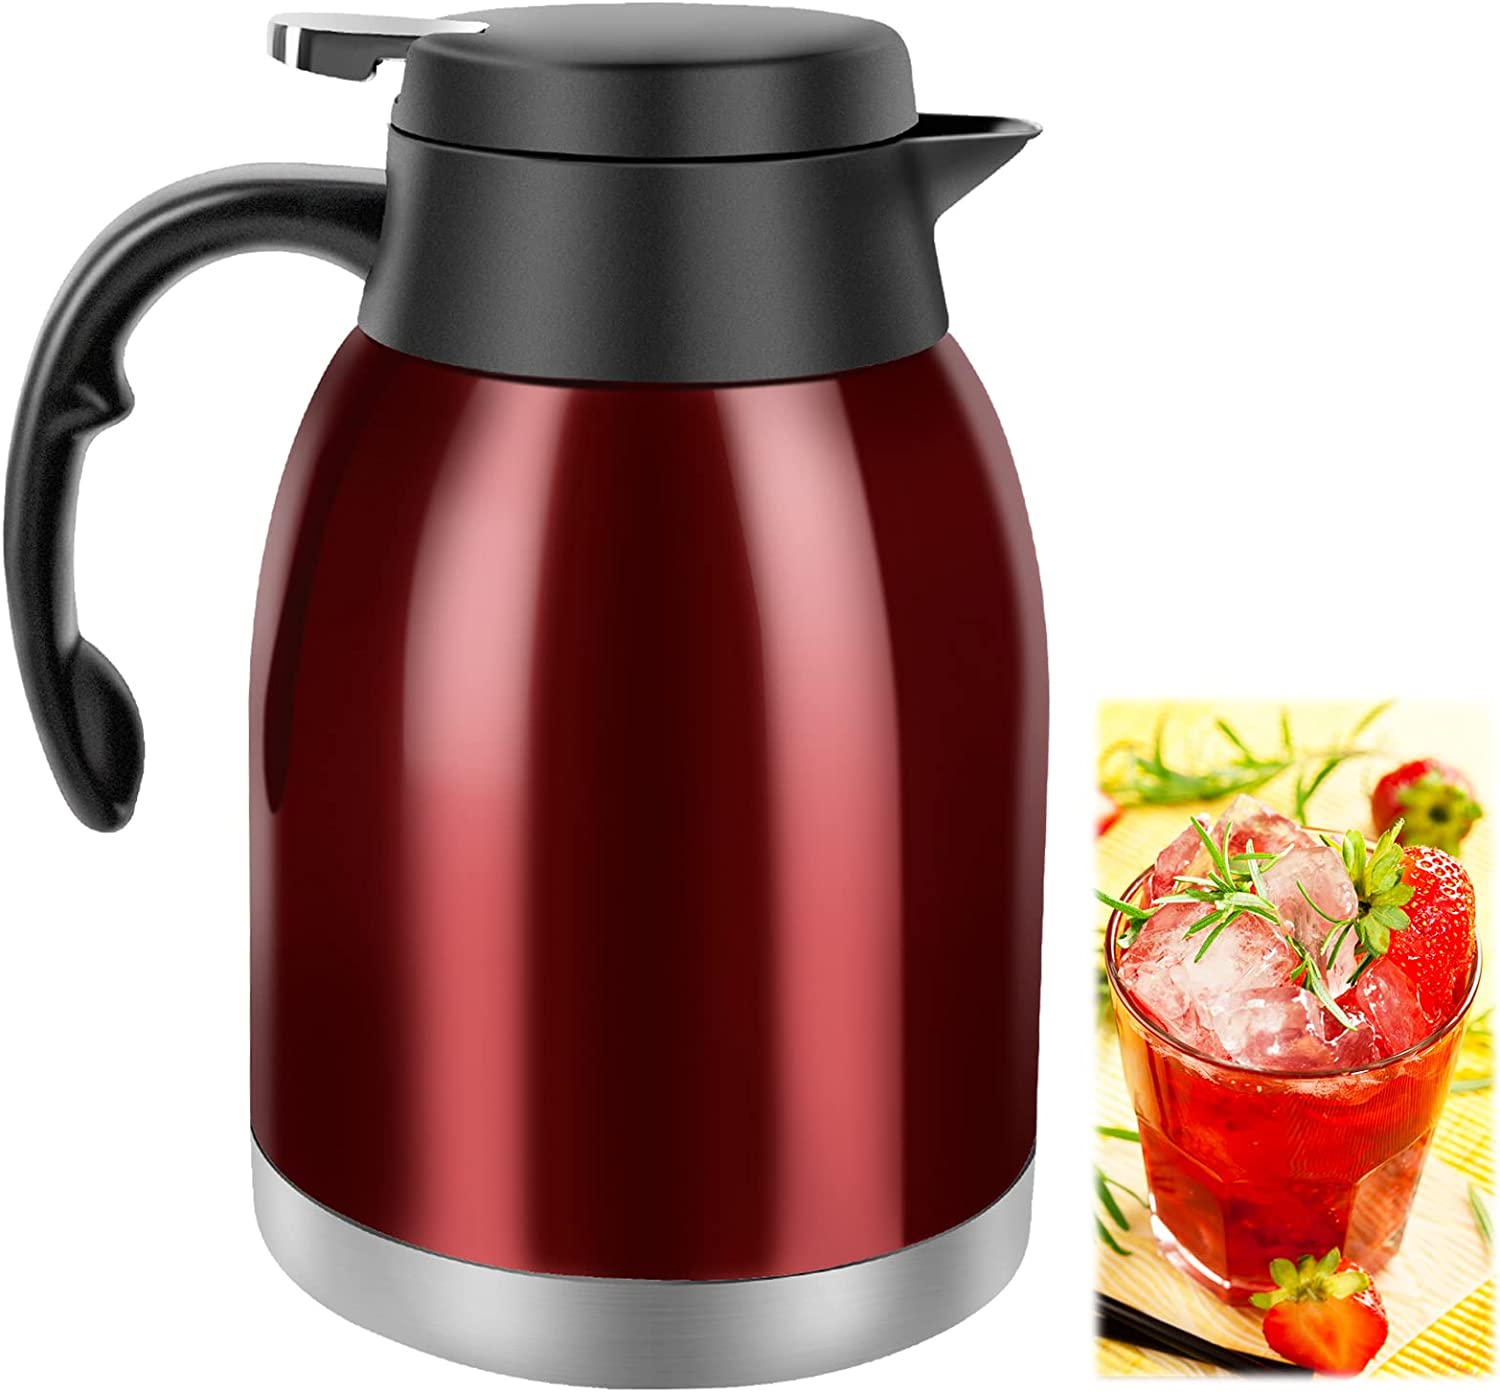 Stainless Steel Thermal Coffee Carafe Dispenser, Unbreakable